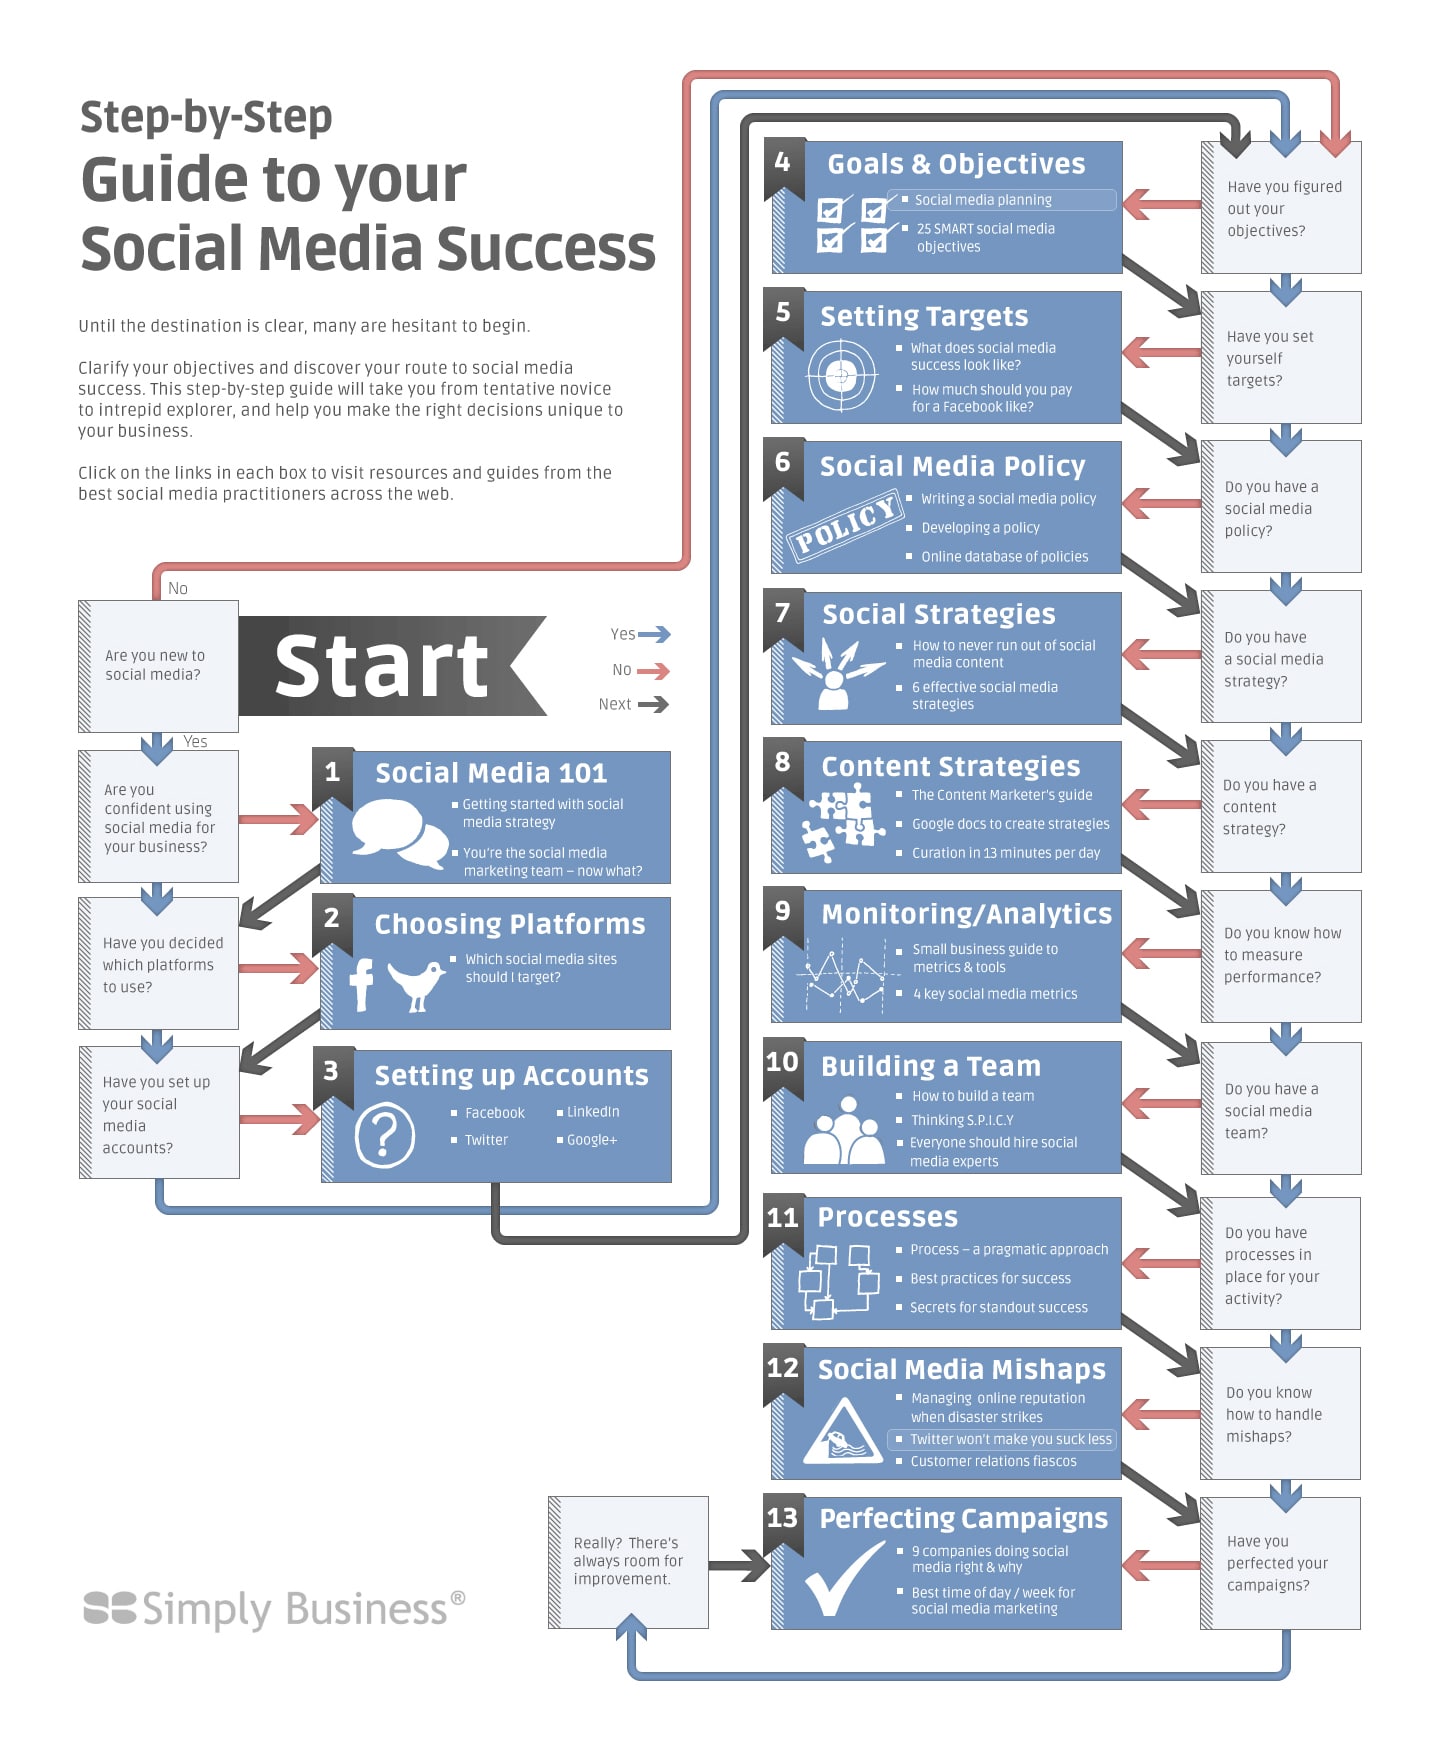 Step-By-Step Guide To Social Media Success [Flowchart]